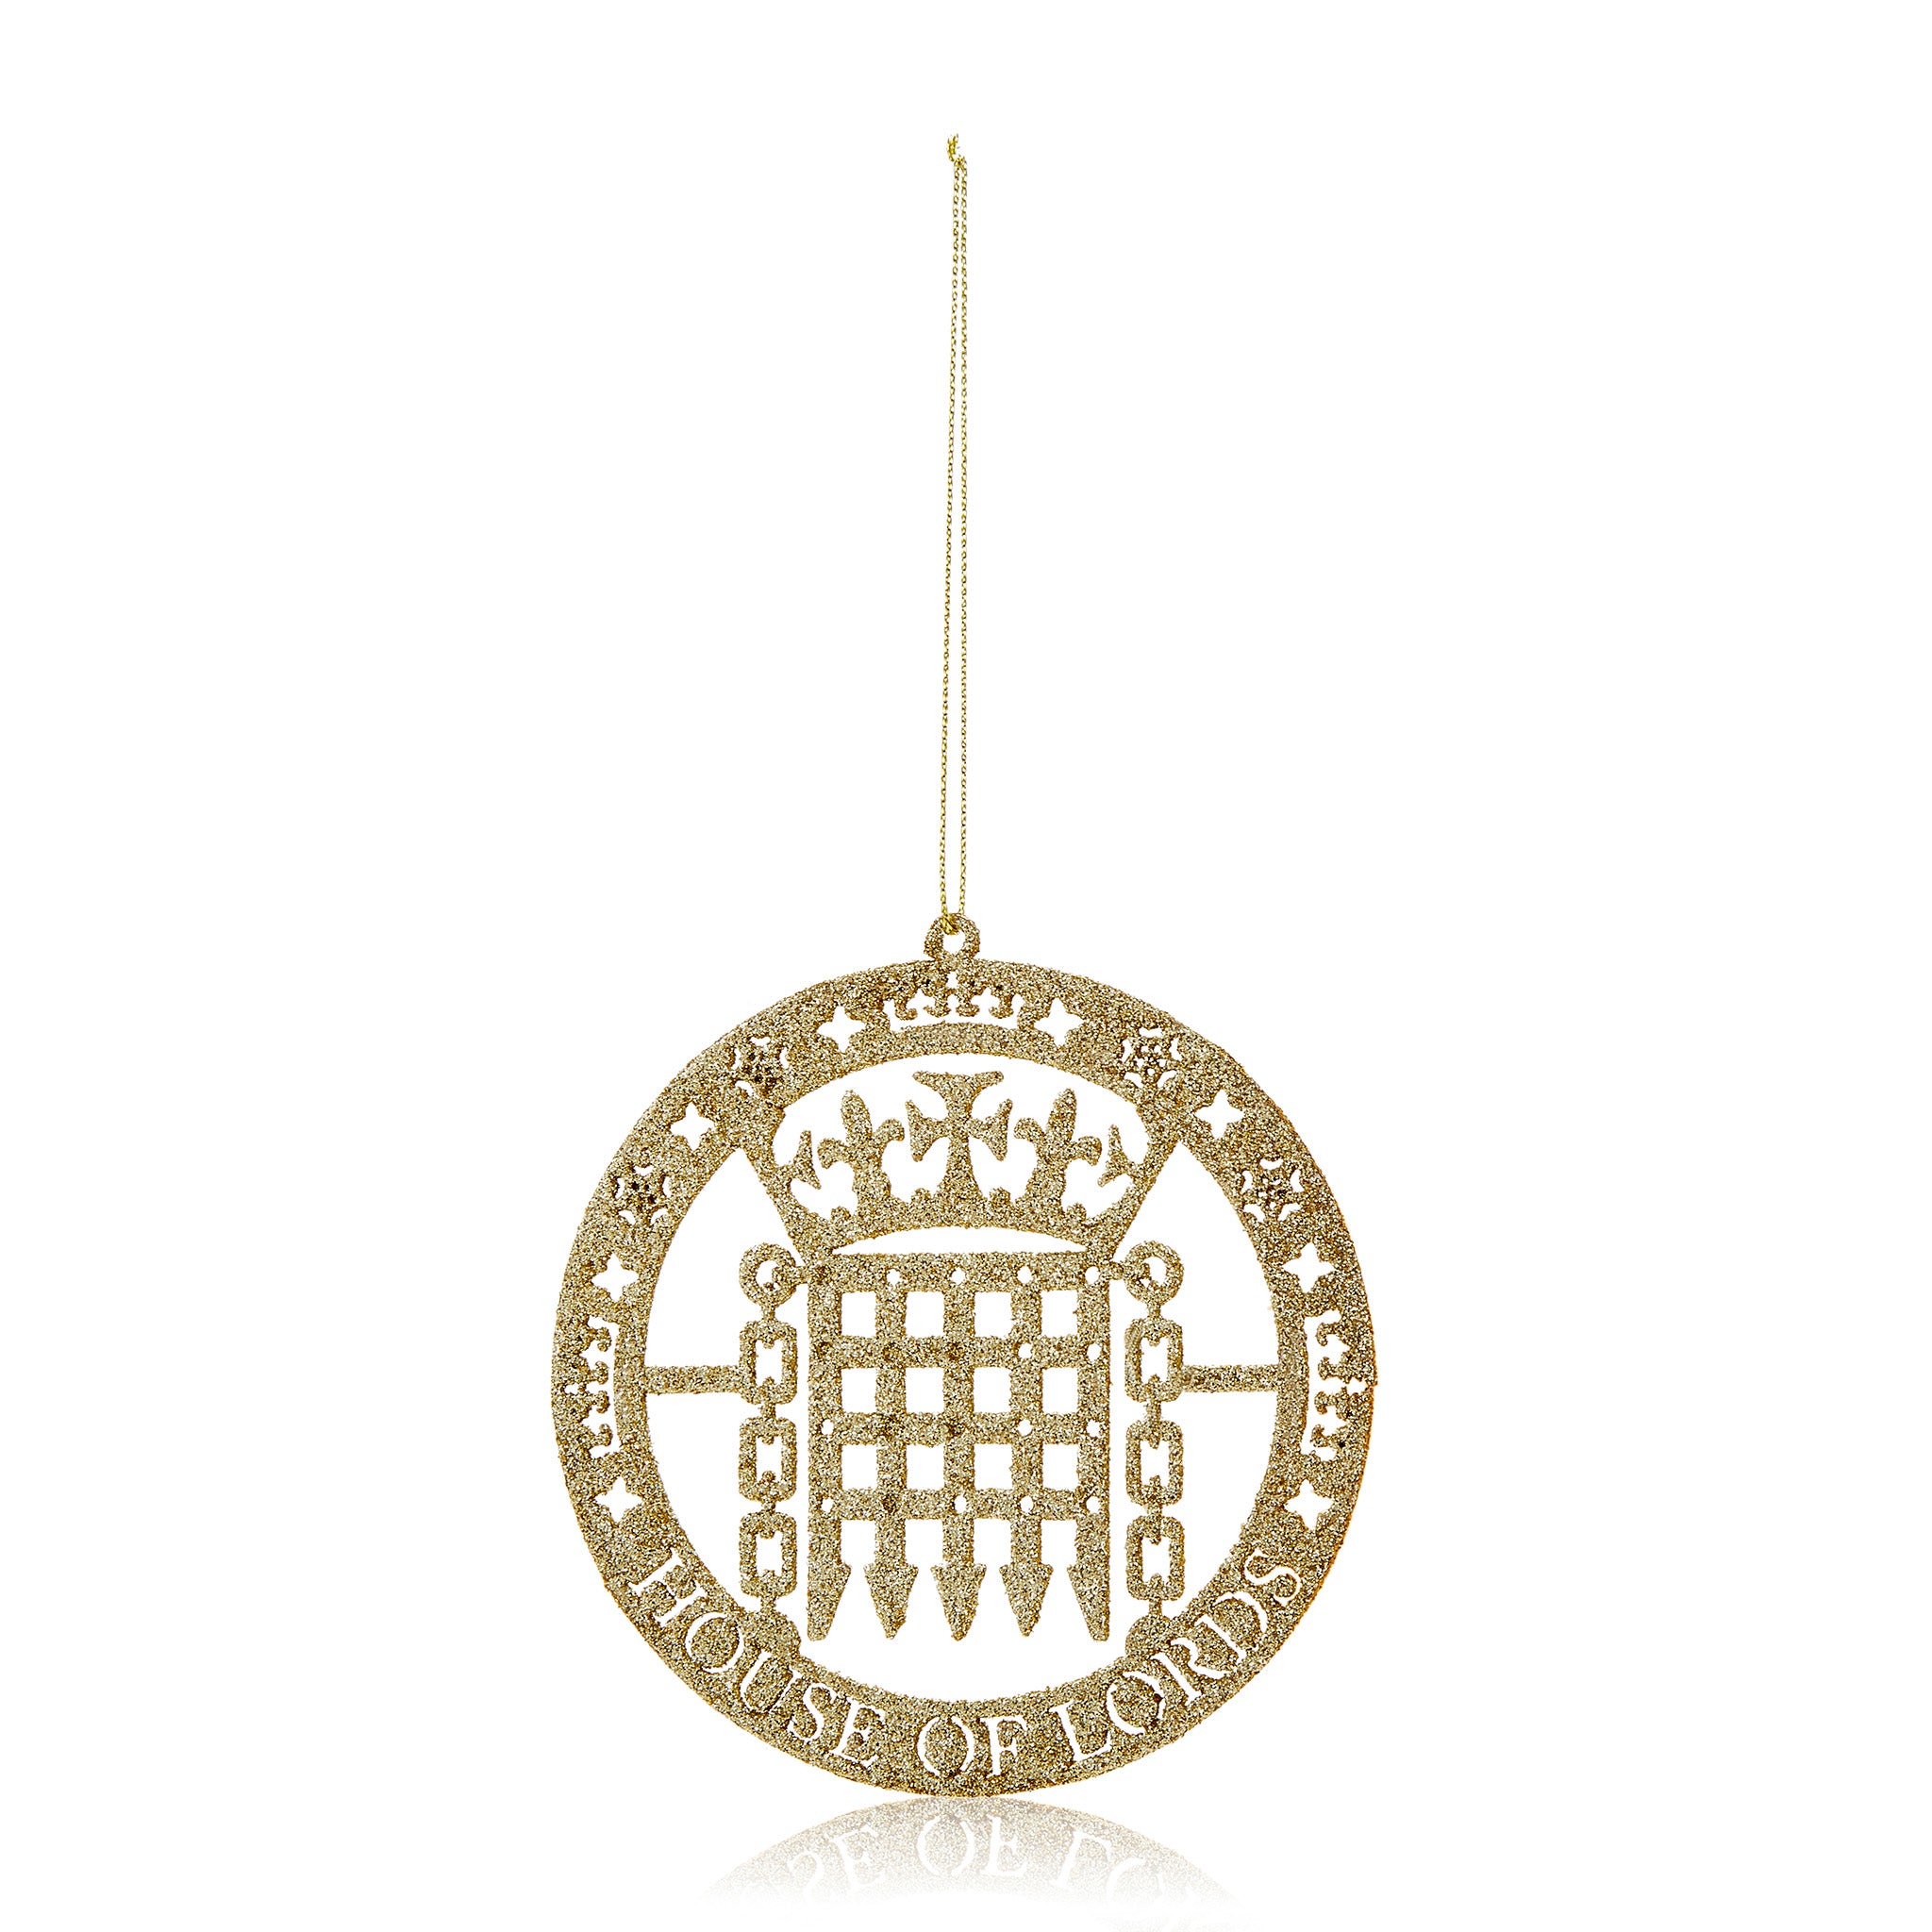 House of Lords Glitter Cut Out Decoration